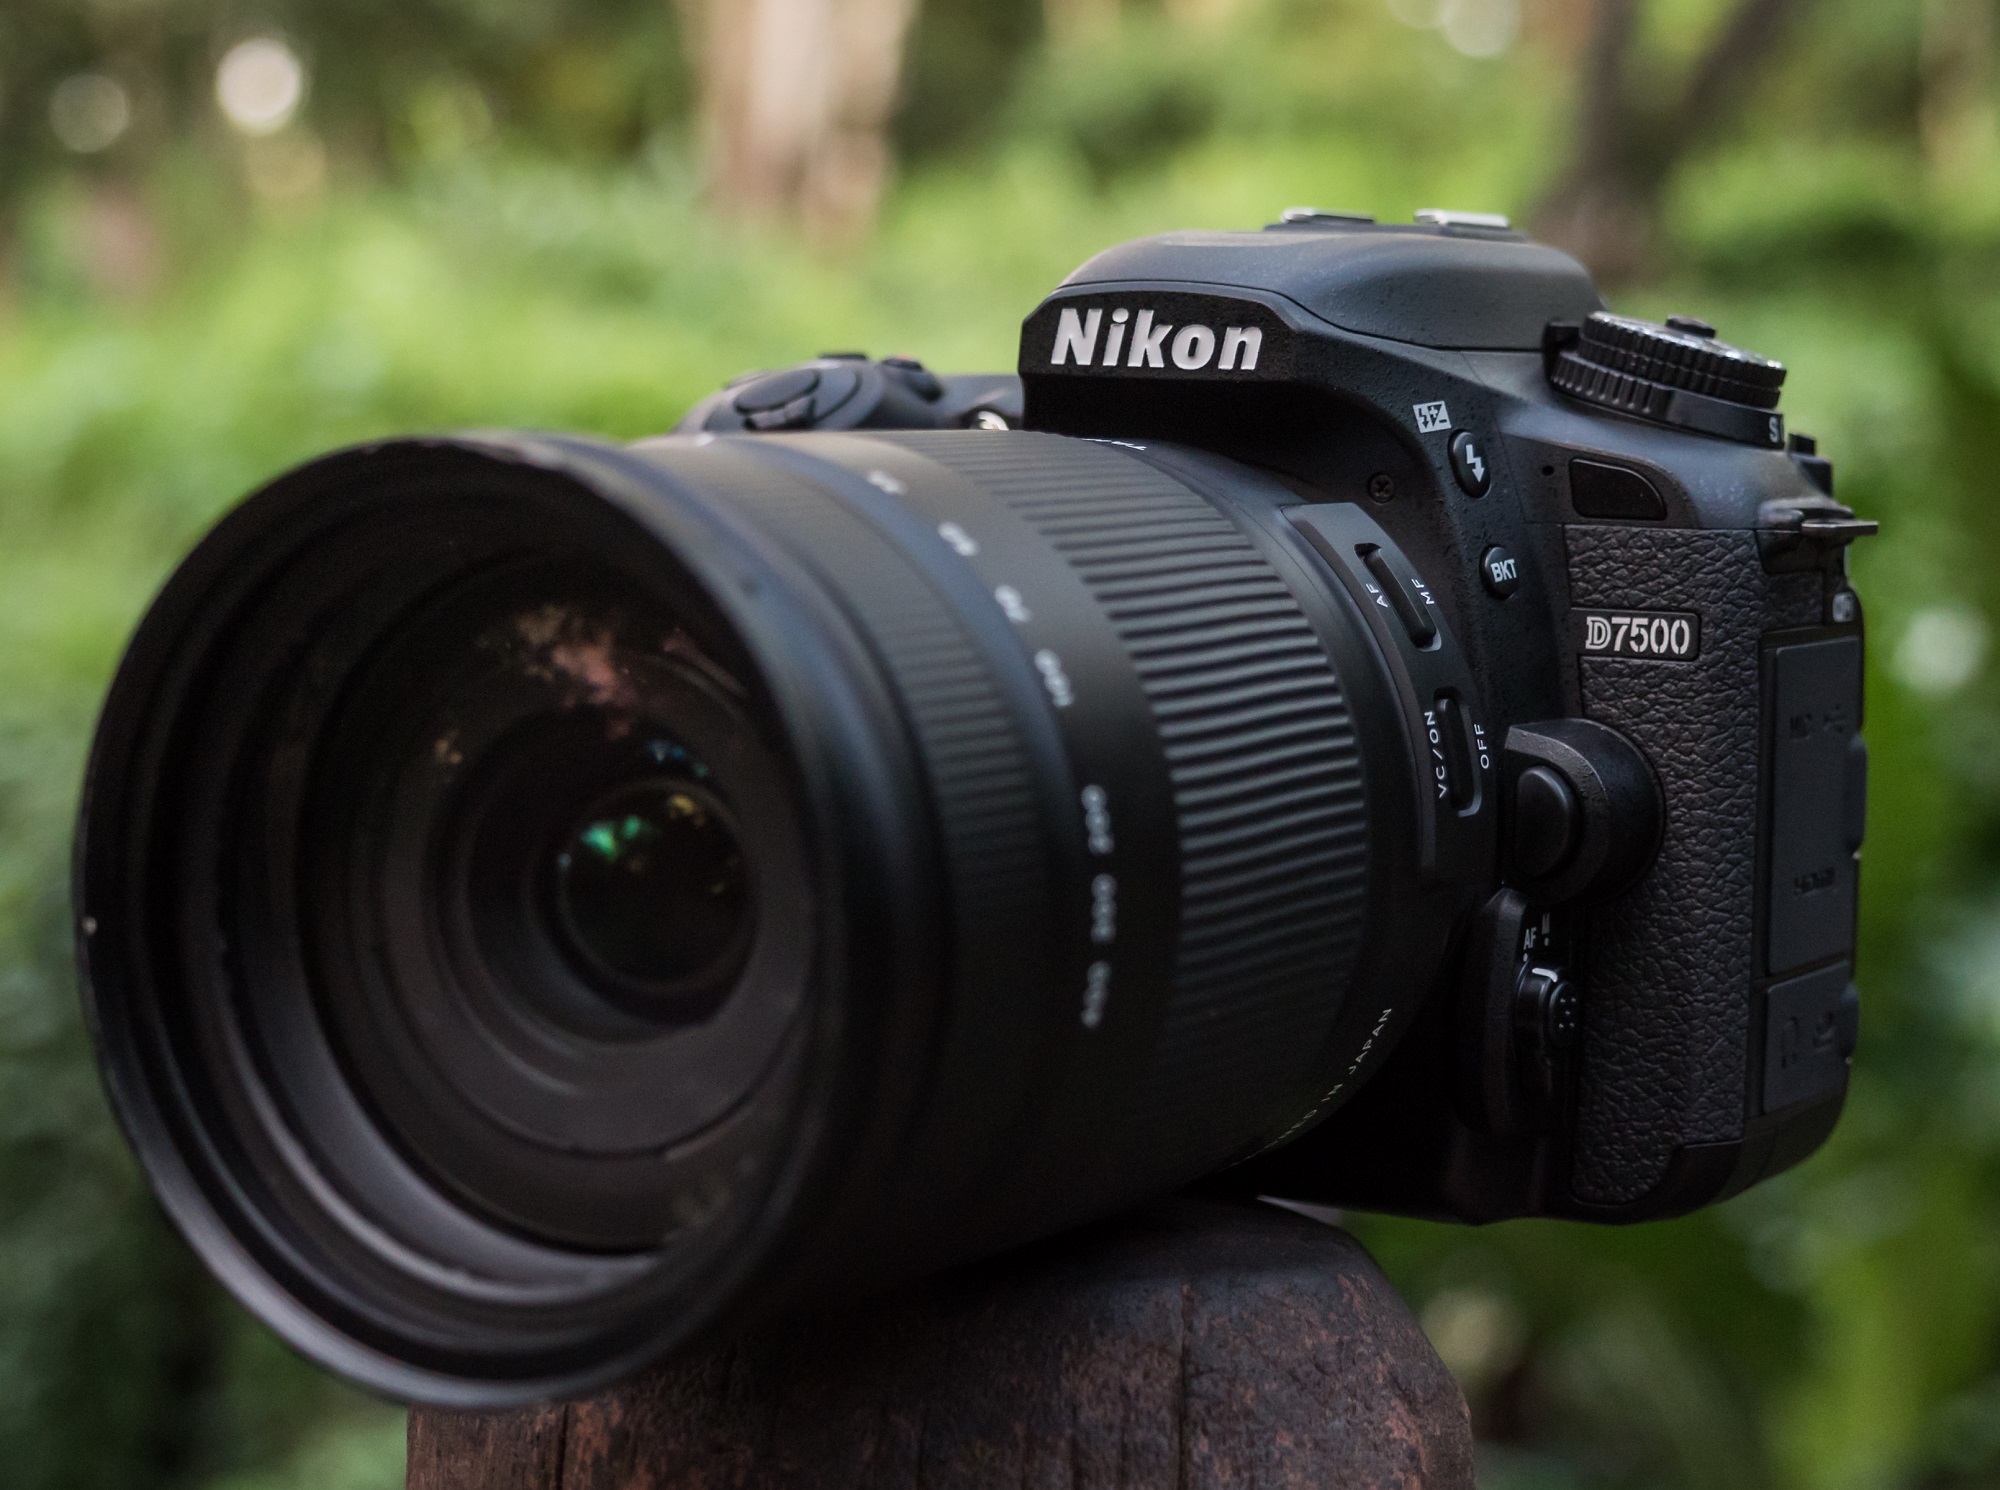 Nikon D7500 Hands On Review | HuffPost Contributor